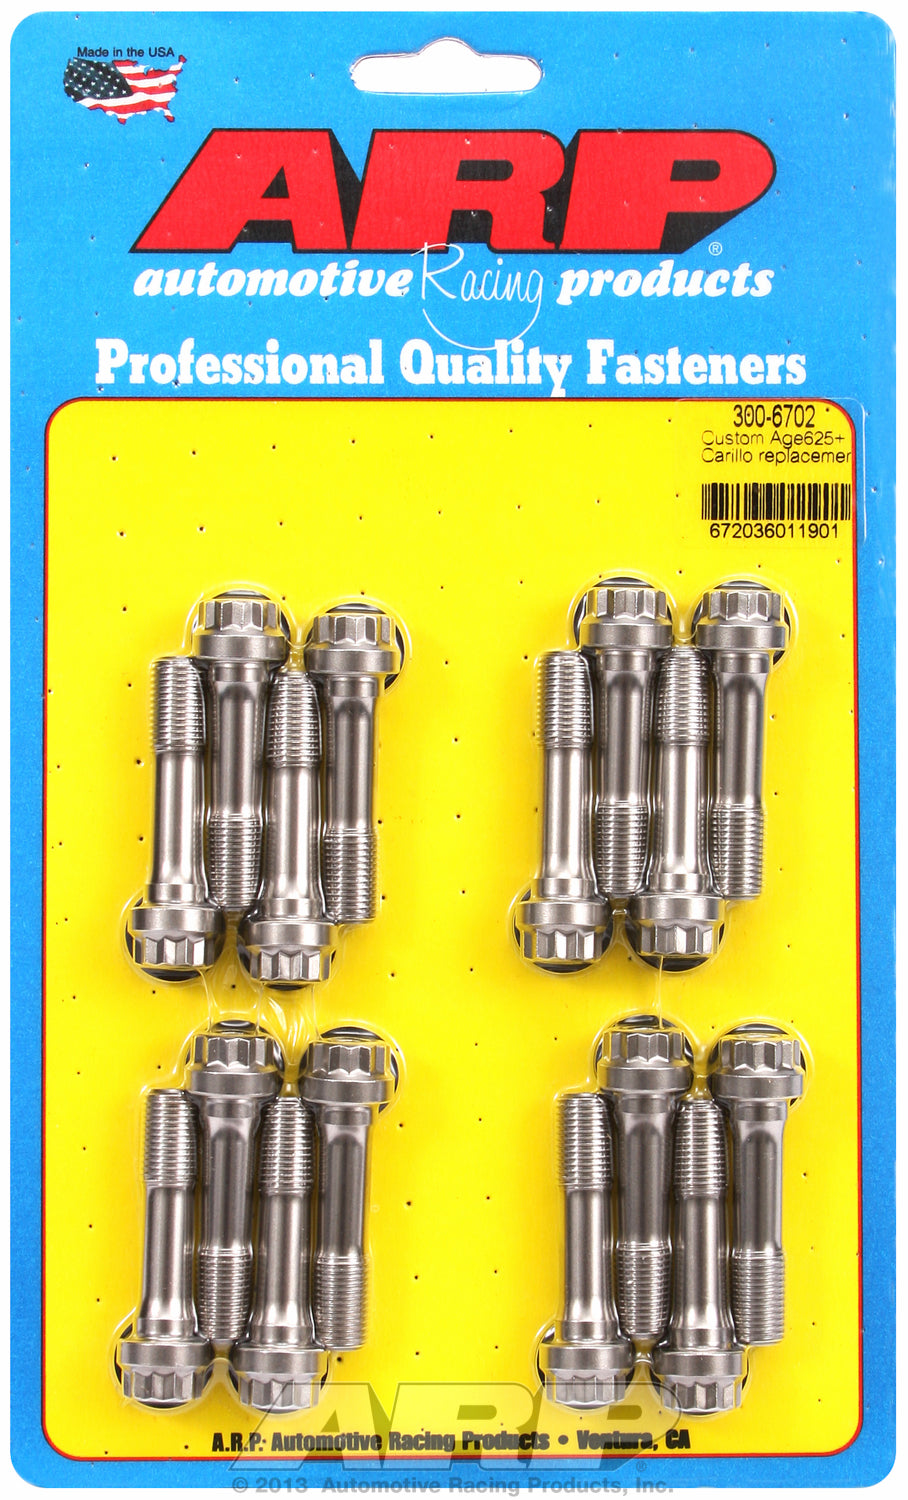 Custom Age 625+ General Replacement Rod Bolt Kit Complete - Set of 16